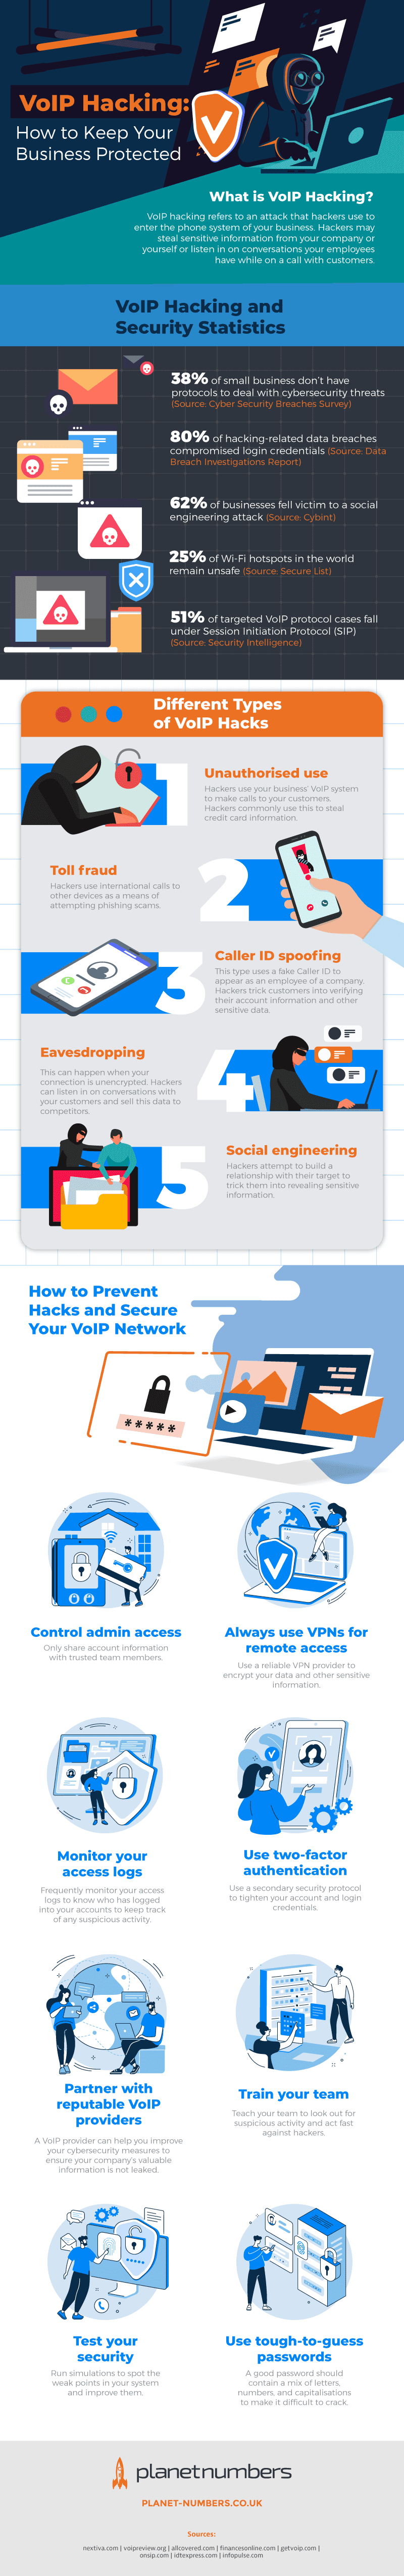 inforgraphic about voip hacking